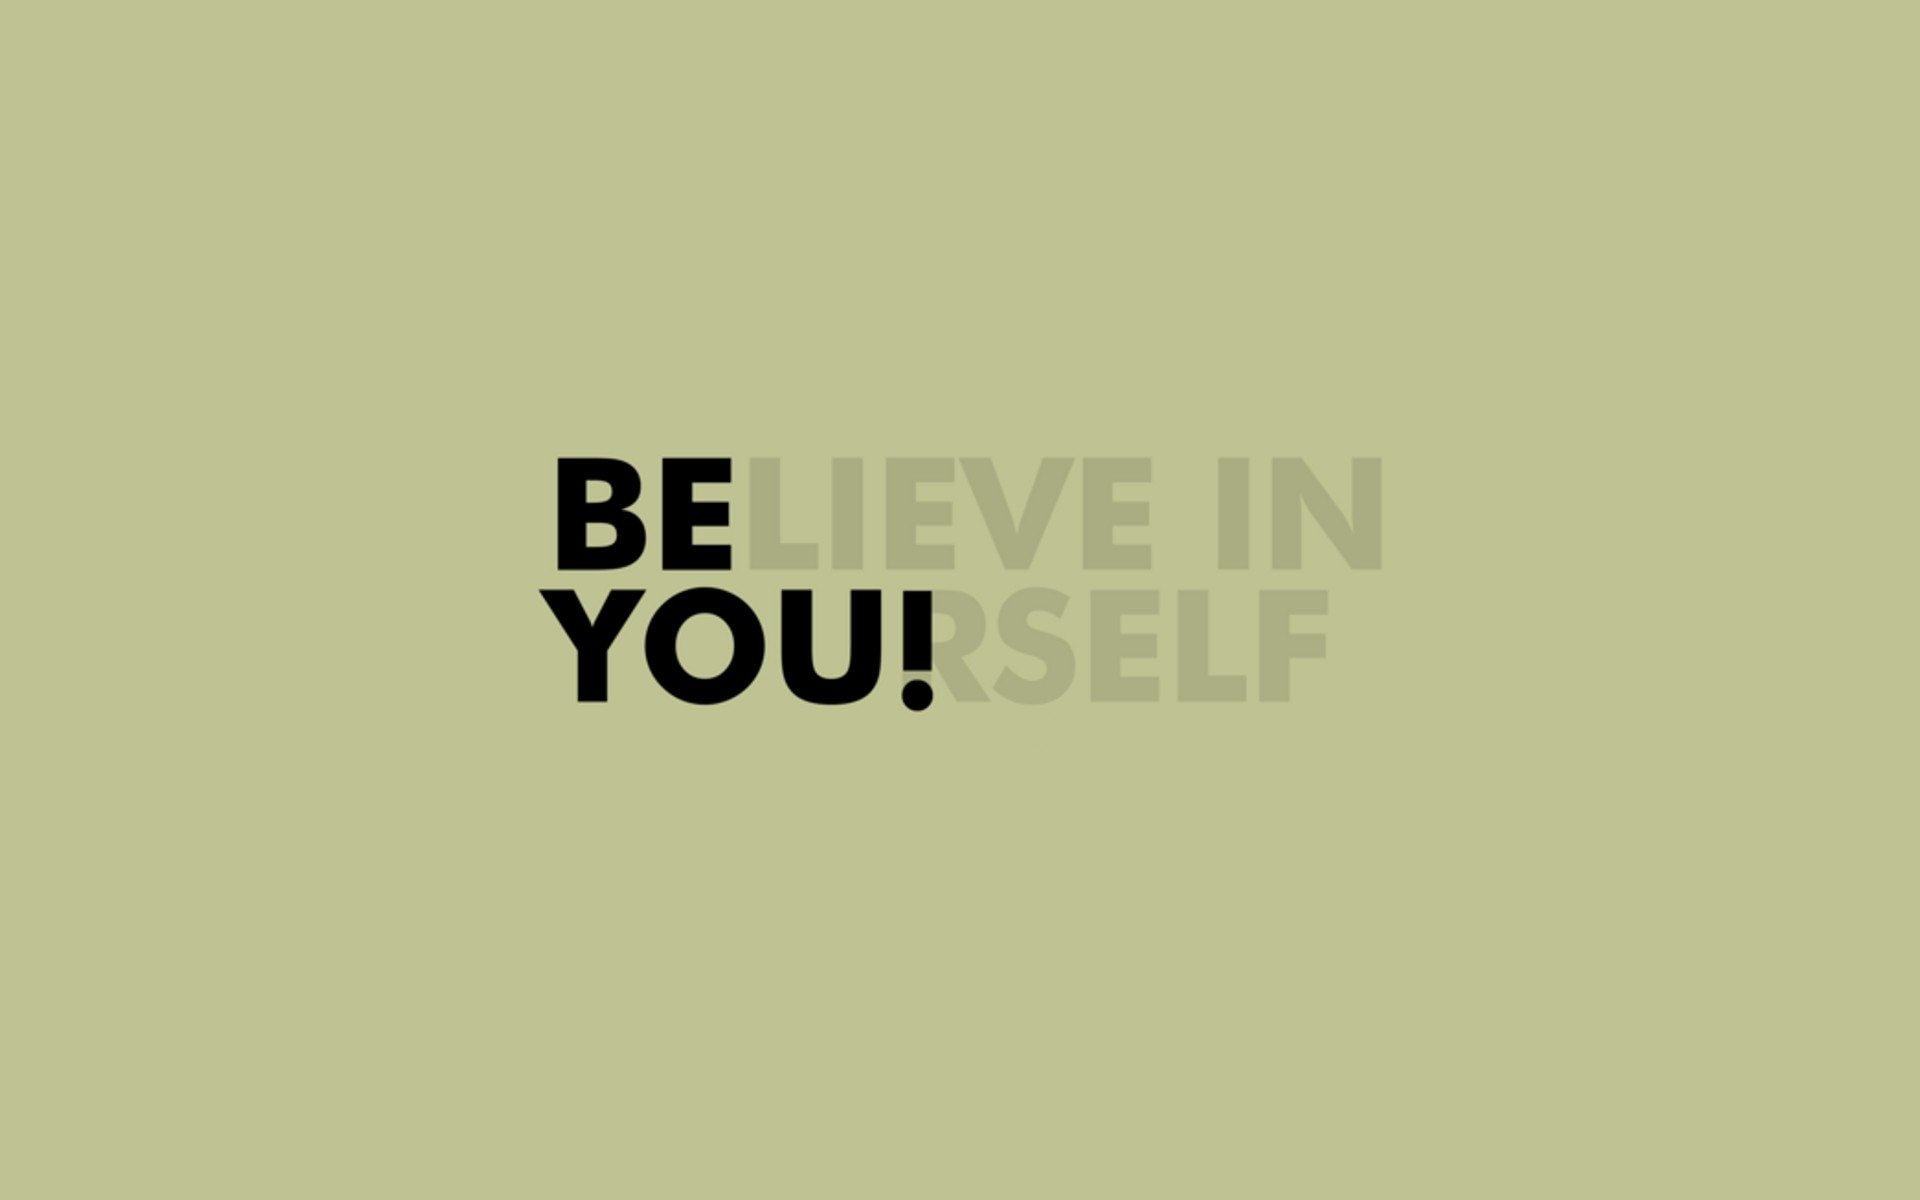 believe in yourself text illustration, Misc, Motivational